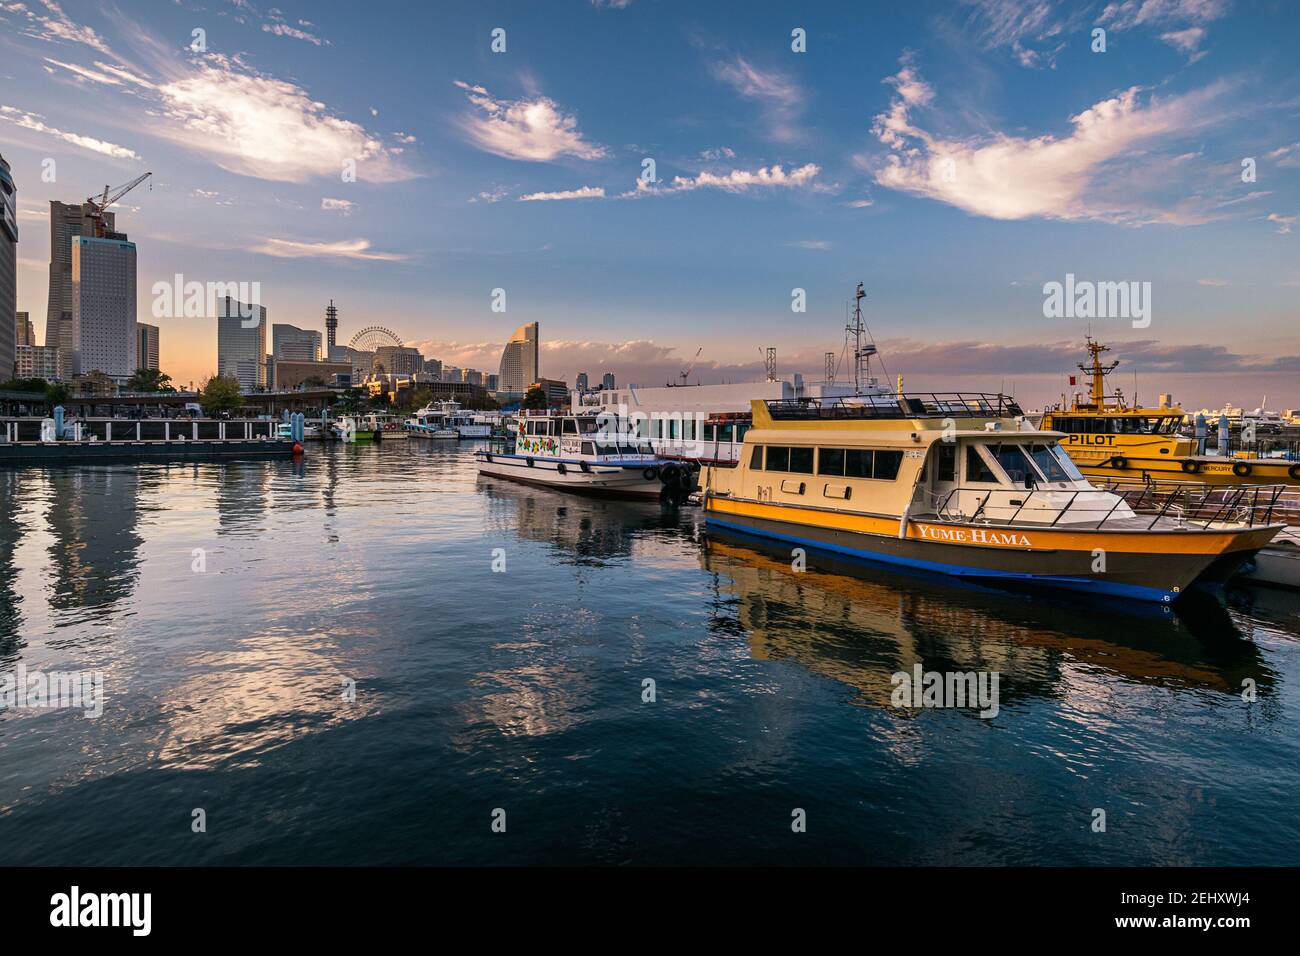 Boats docked at sunset at one of the piers in the Yokohama Ferry Terminal area. Stock Photo